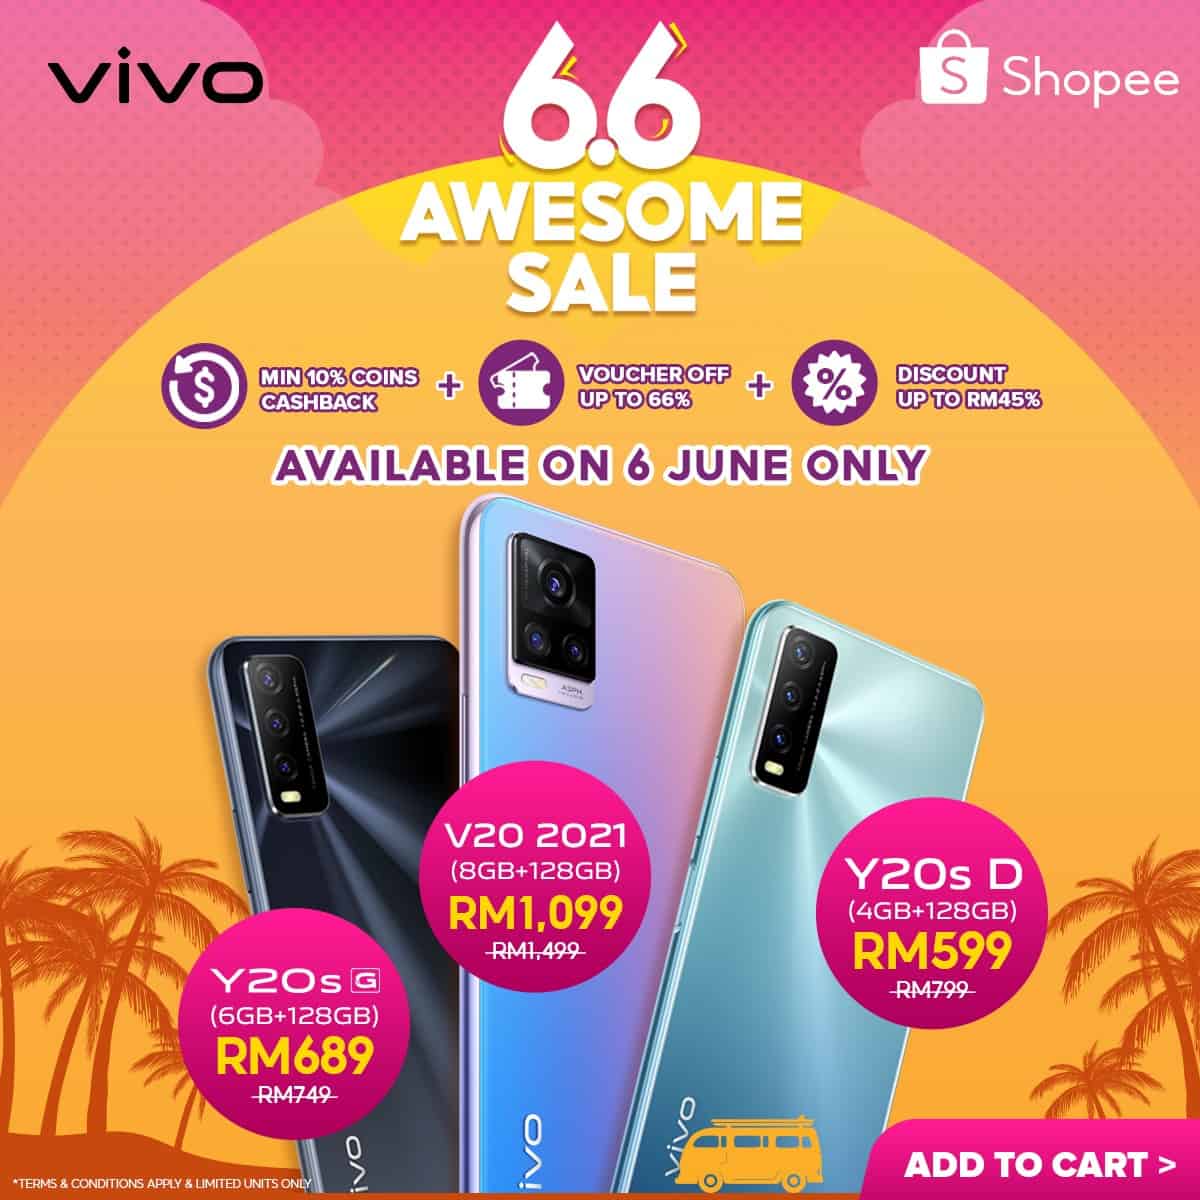 Read more about the article vivo x Shopee 6.6 Awesome Sale offers limited time great deals on 6 June